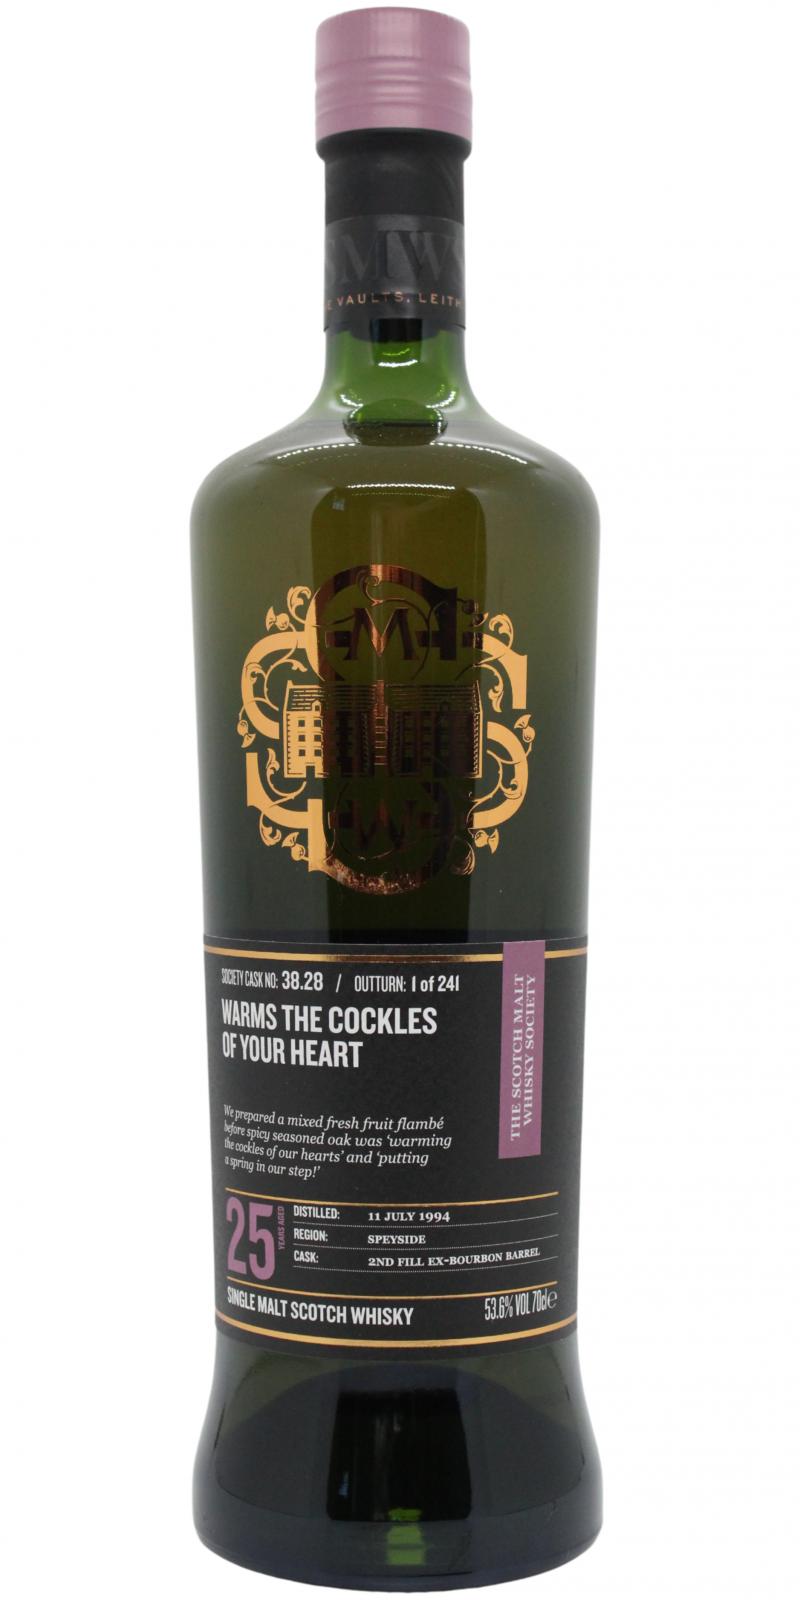 Caperdonich 1994 SMWS 38.28 Warms the cockles ofyo ur heart 2nd Fill Ex-Bourbon Barrel 53.6% 700ml